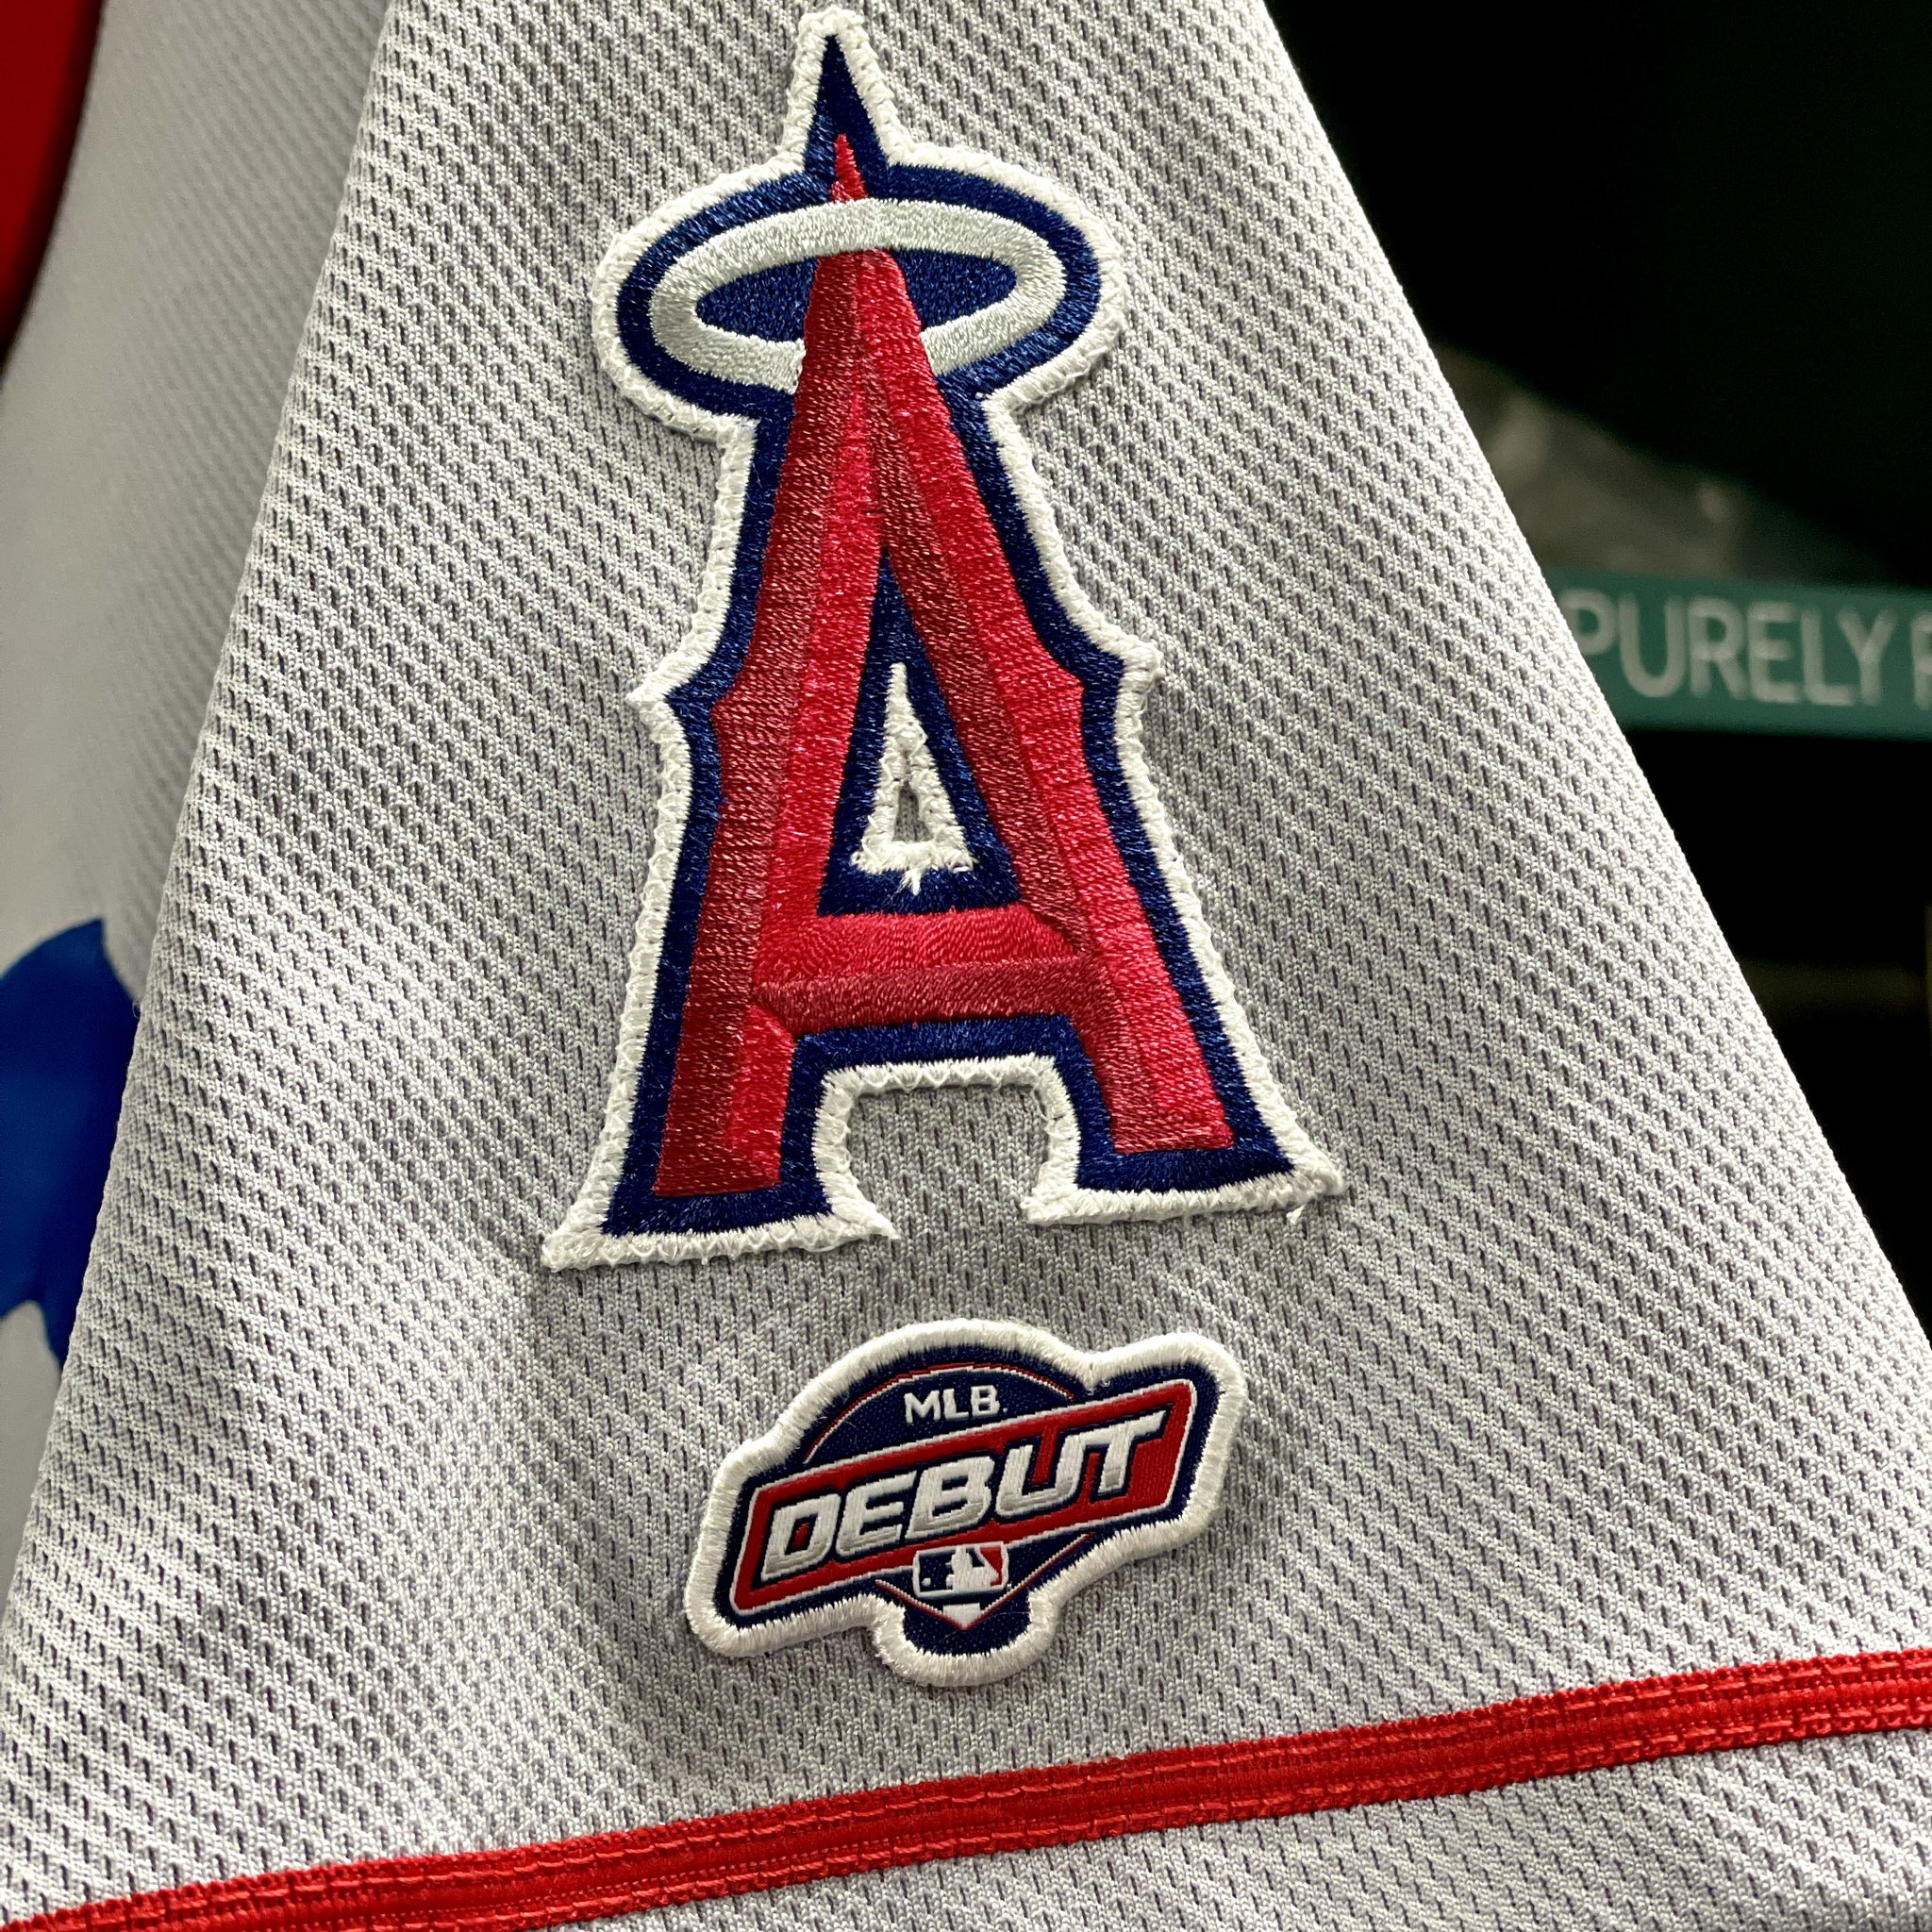 Los Angeles Angels on X: peep the new patch 👀 #GoHalos